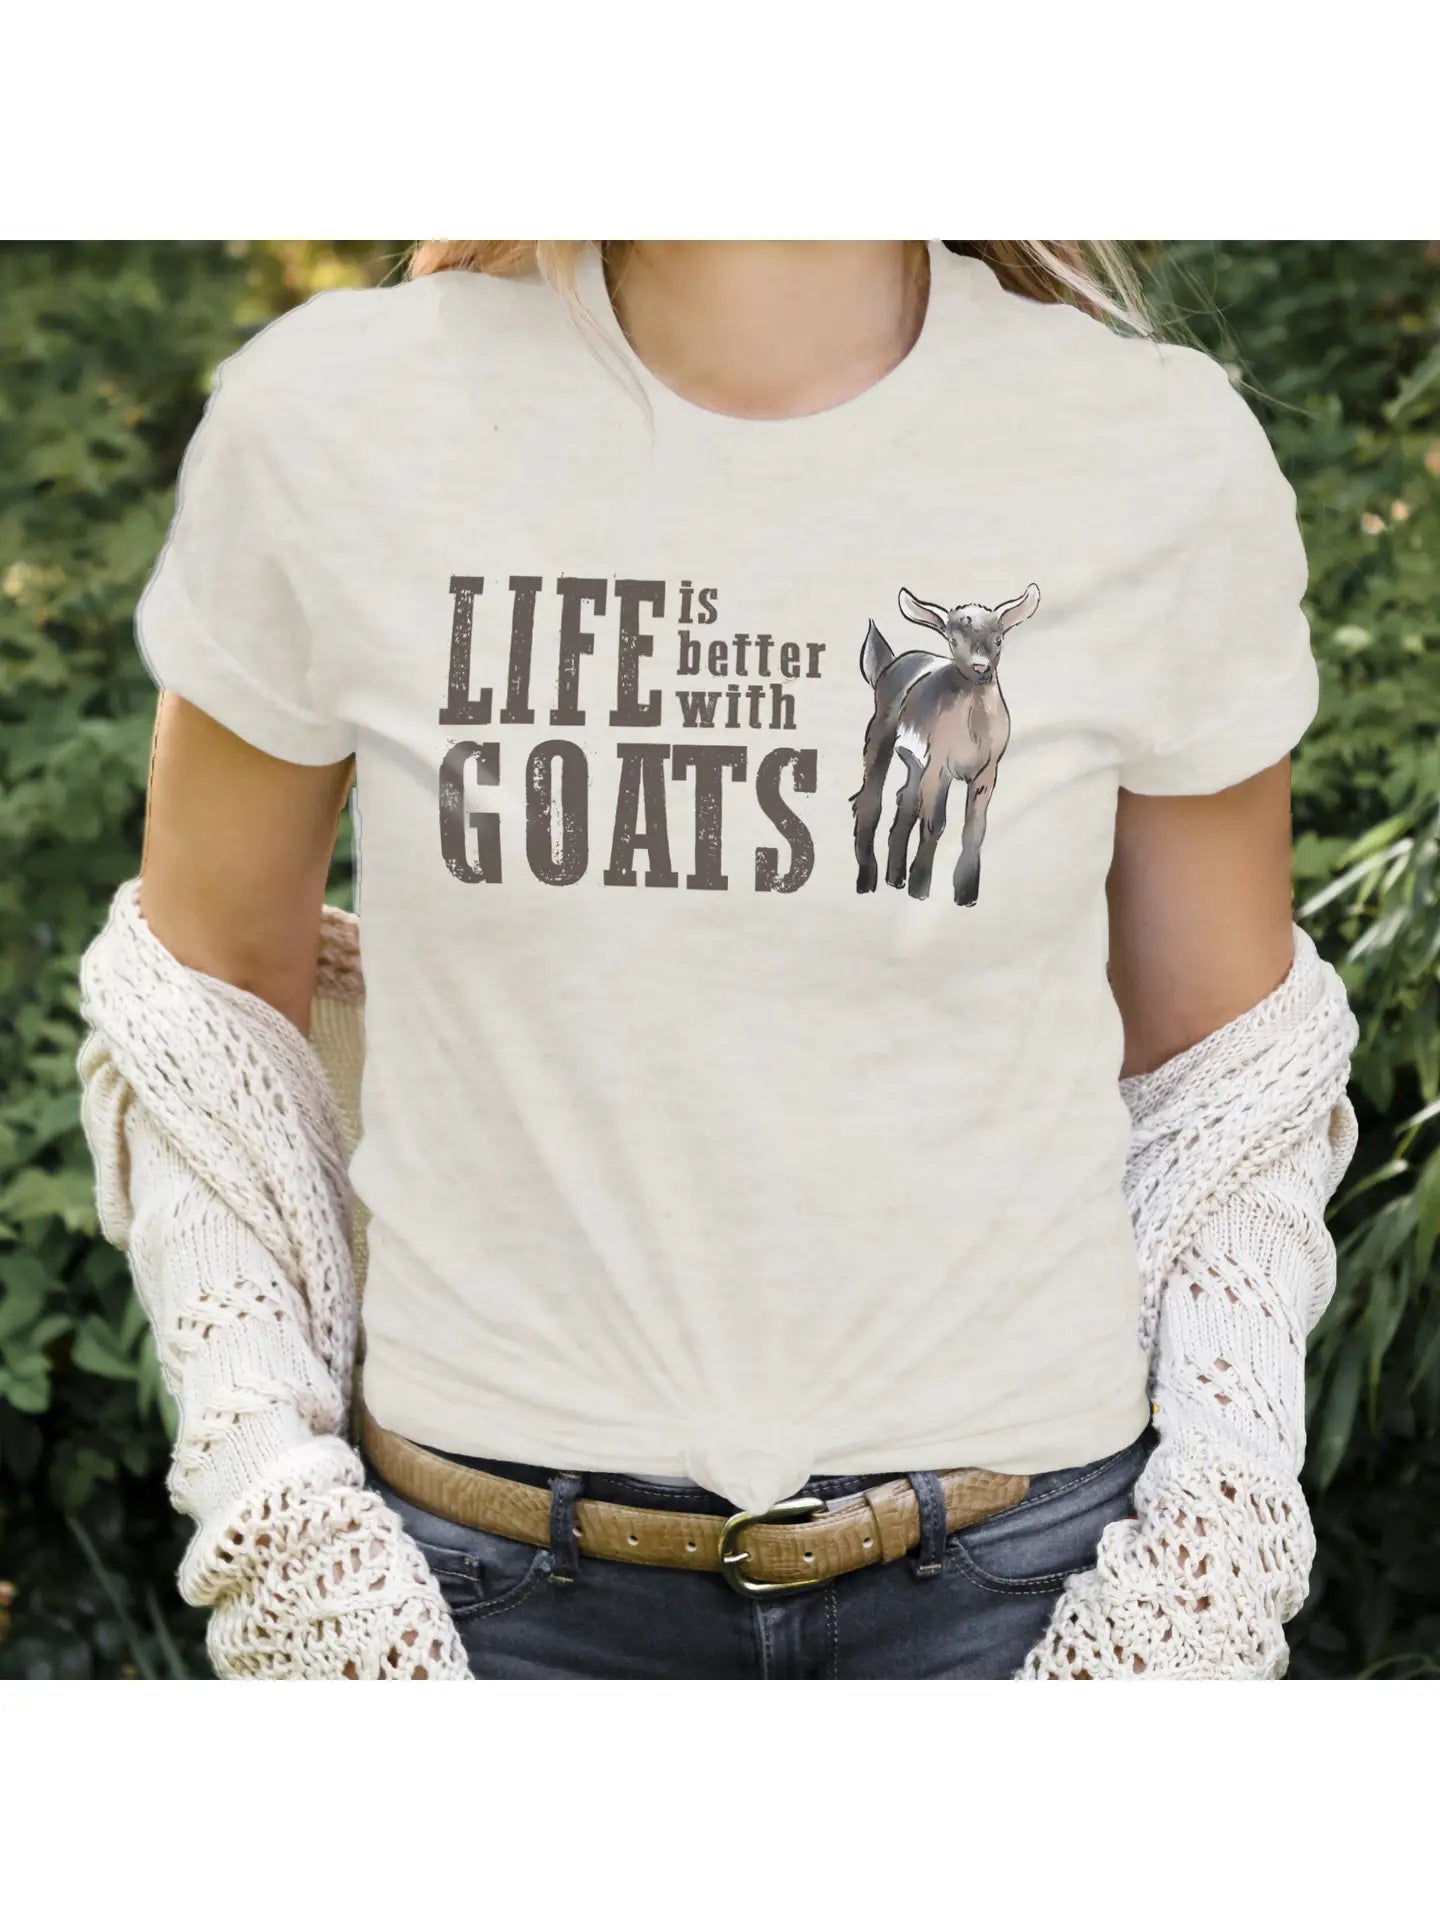 "Life is better with Goats!" T-shirt